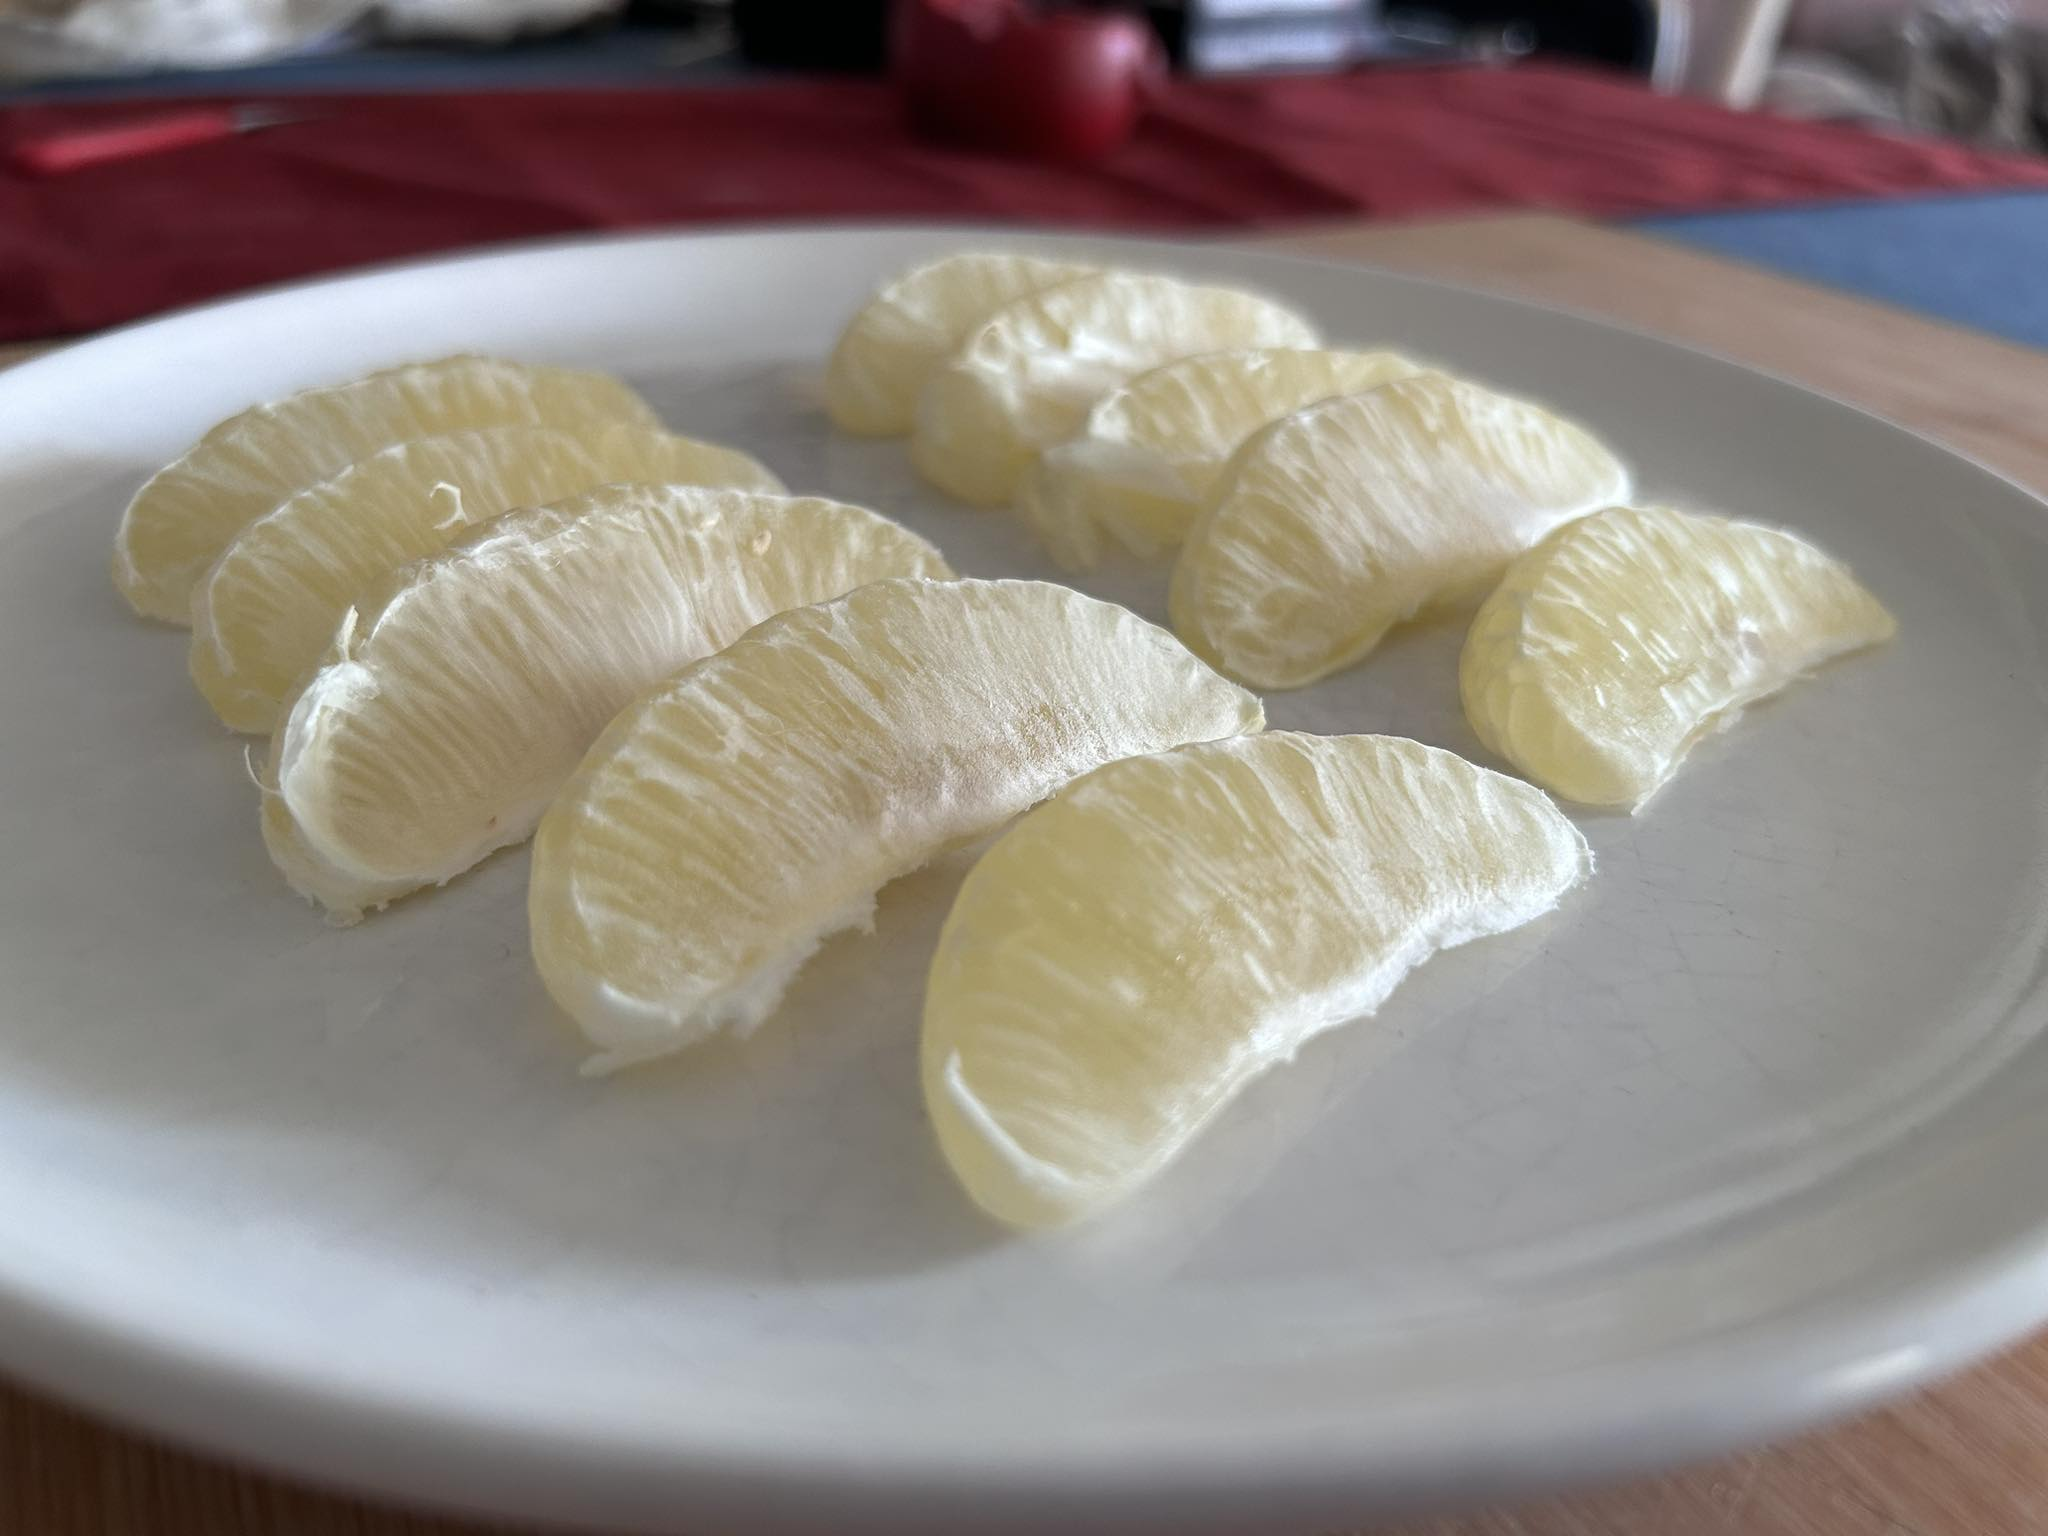 Very pale slices of fruit on a plate